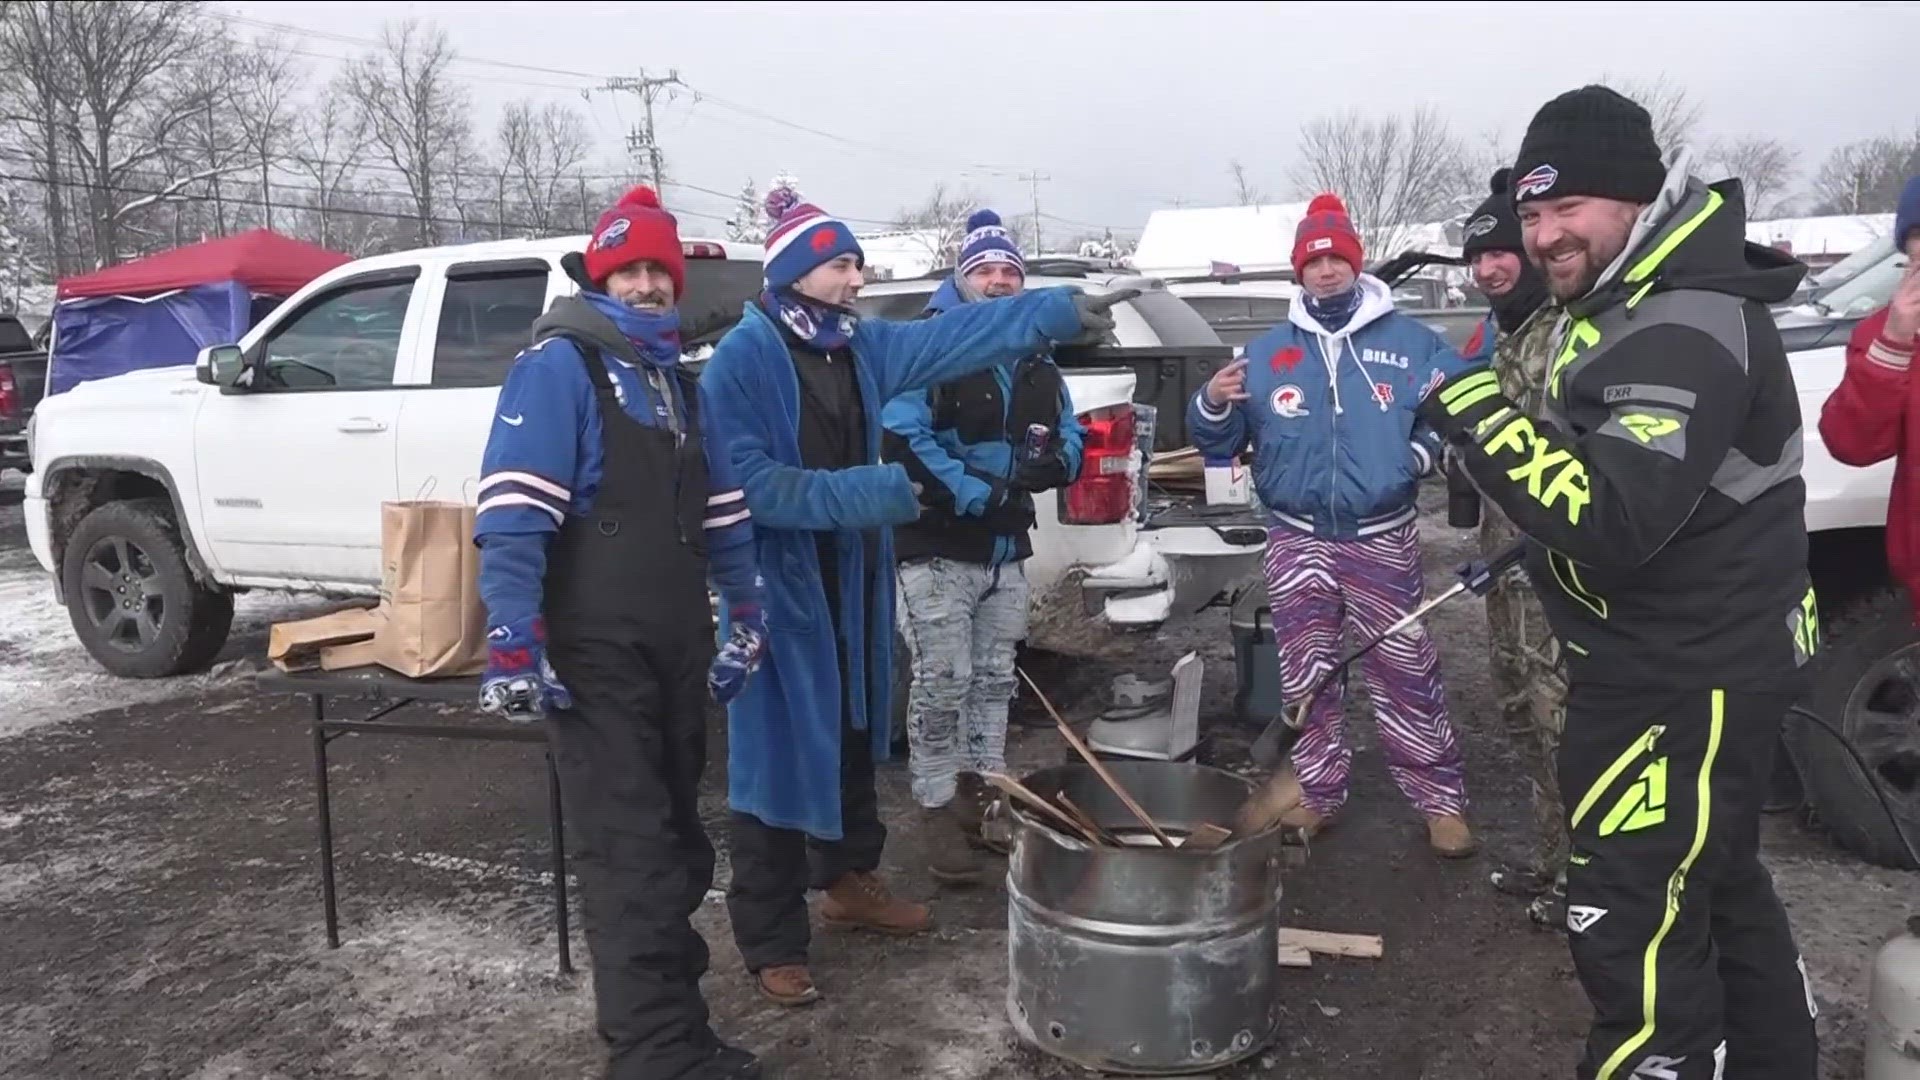 Bills fans brave snow and cold for playoff game